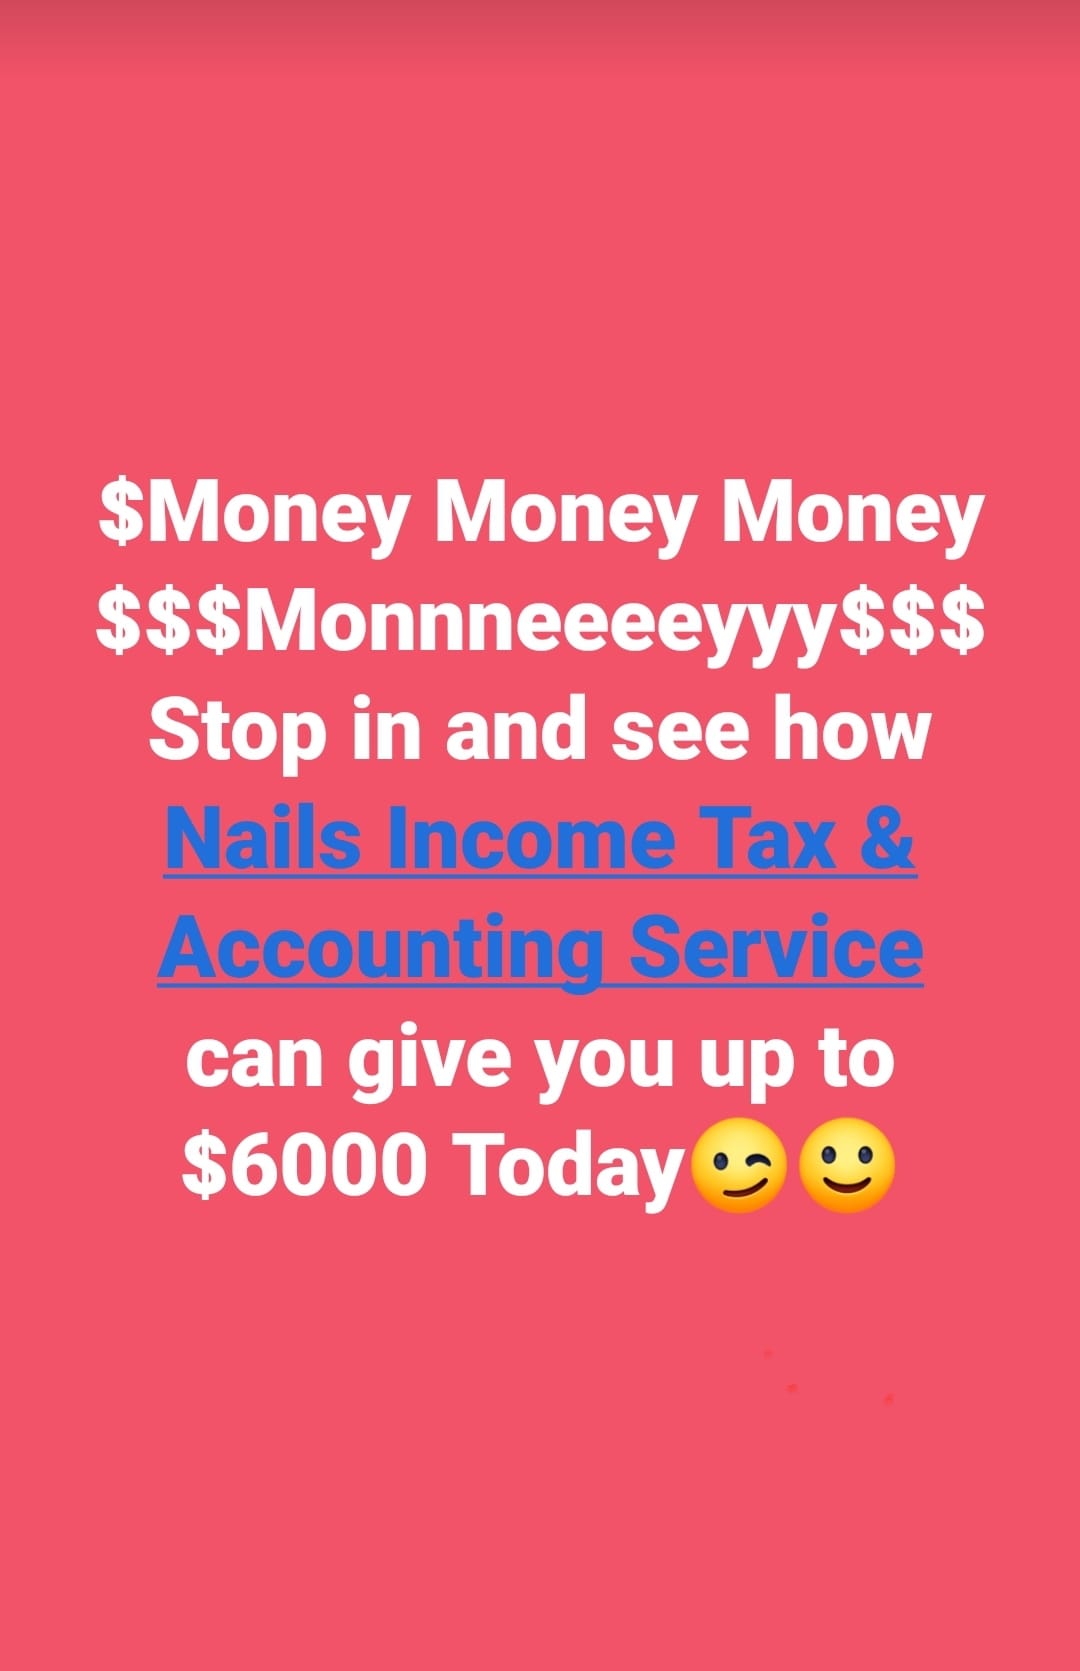 Nails Income Tax & Accounting 61 NORTH SE Park Ave #2, Baxley Georgia 31513